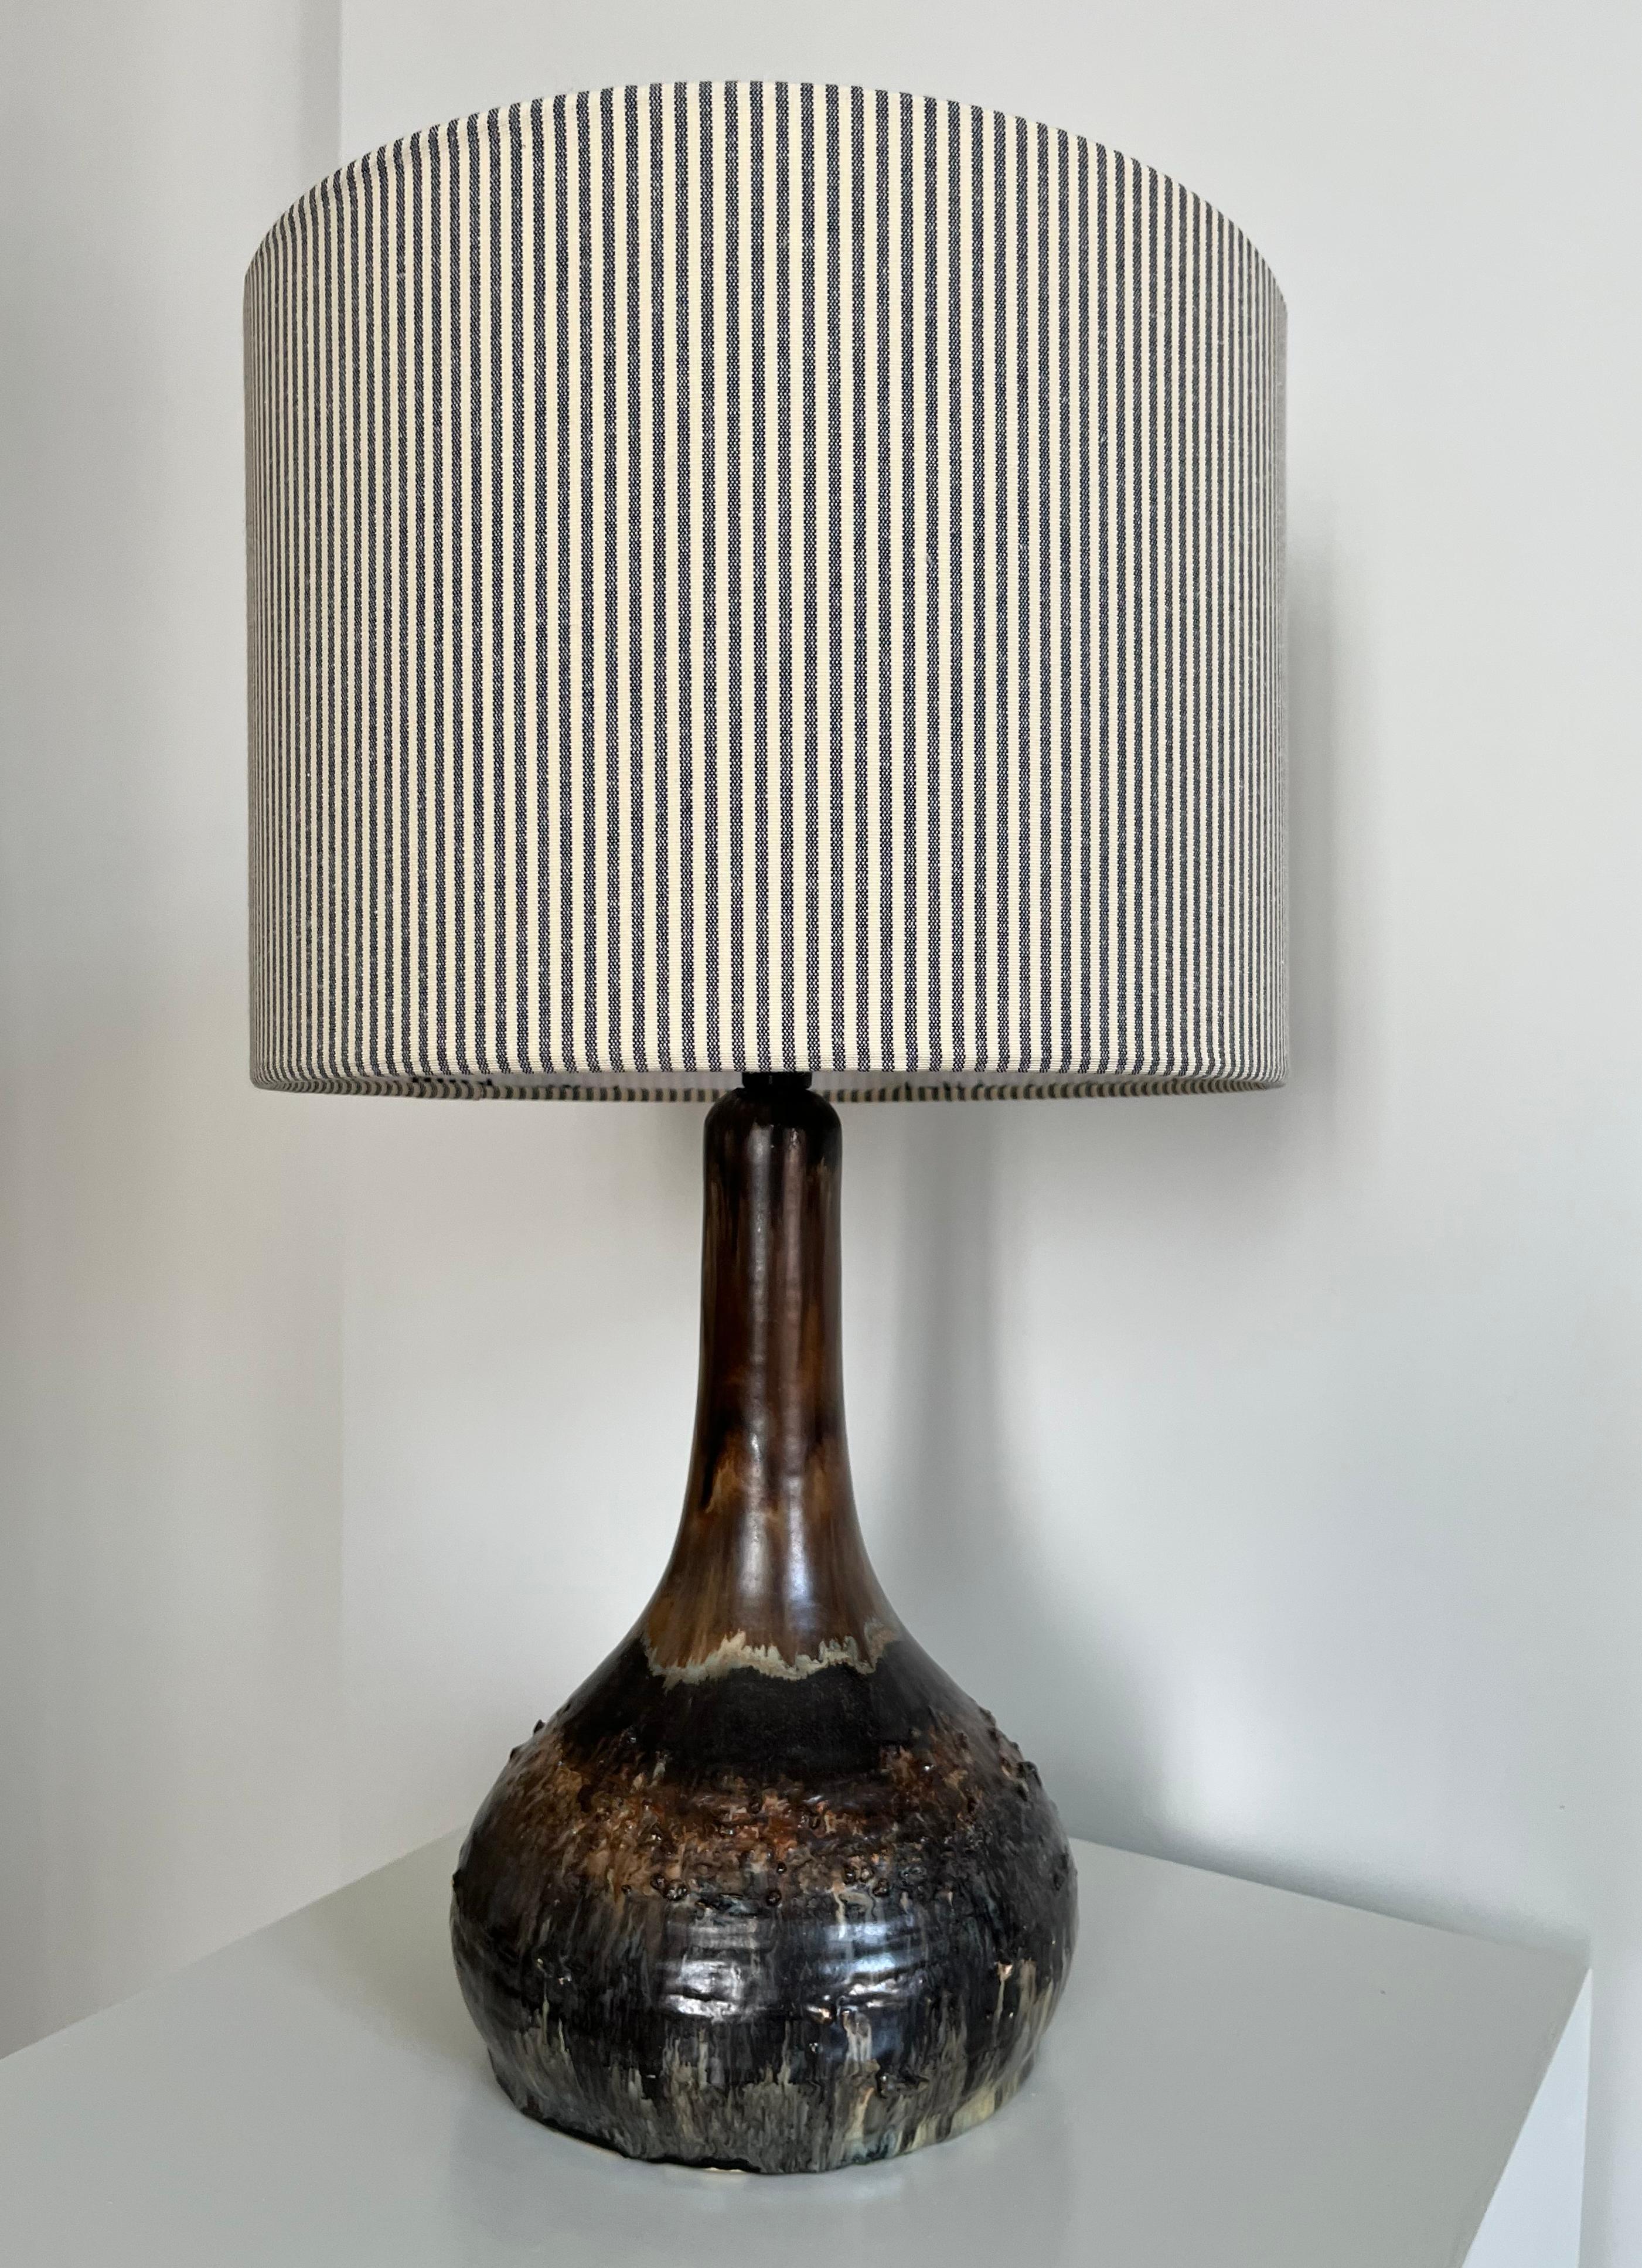 Large Danish table lamp in ceramics decorated with glossy lava glaze and detailed decorations in the ceramic. Glaze in nuances of brown, and a very light green. Handmade in Denmark in the 1970s. 
Sold without the shade.

Height: 36 cm (14.2 in) with